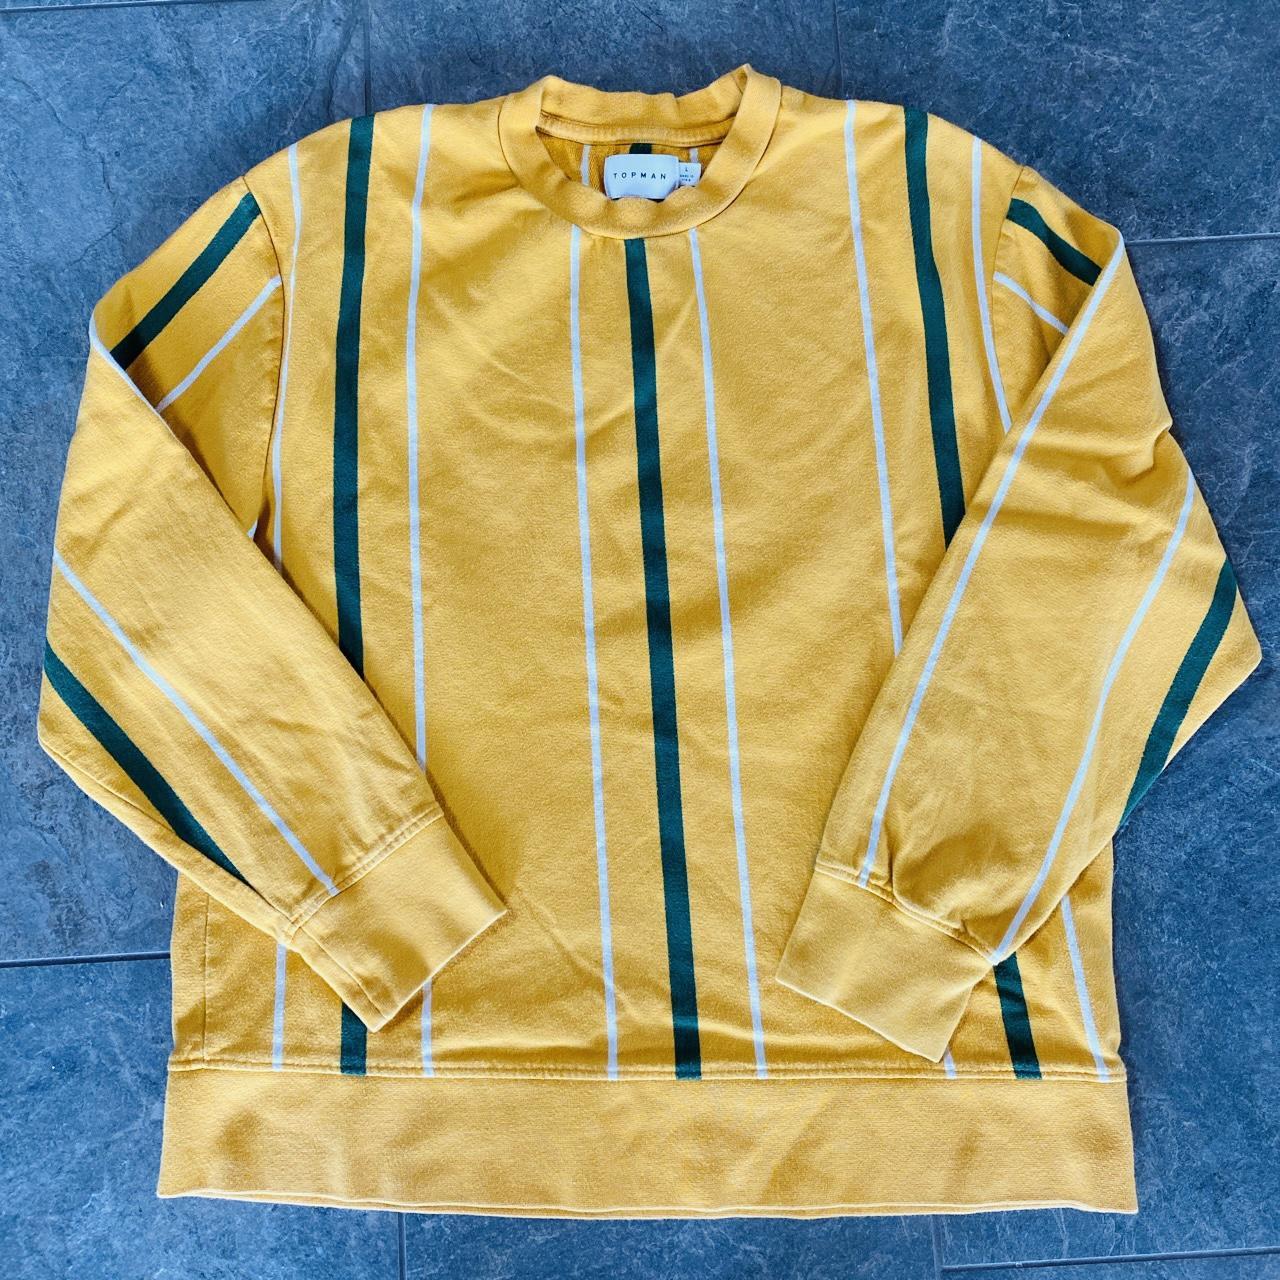 Product Image 1 - TopMan yellow green and white